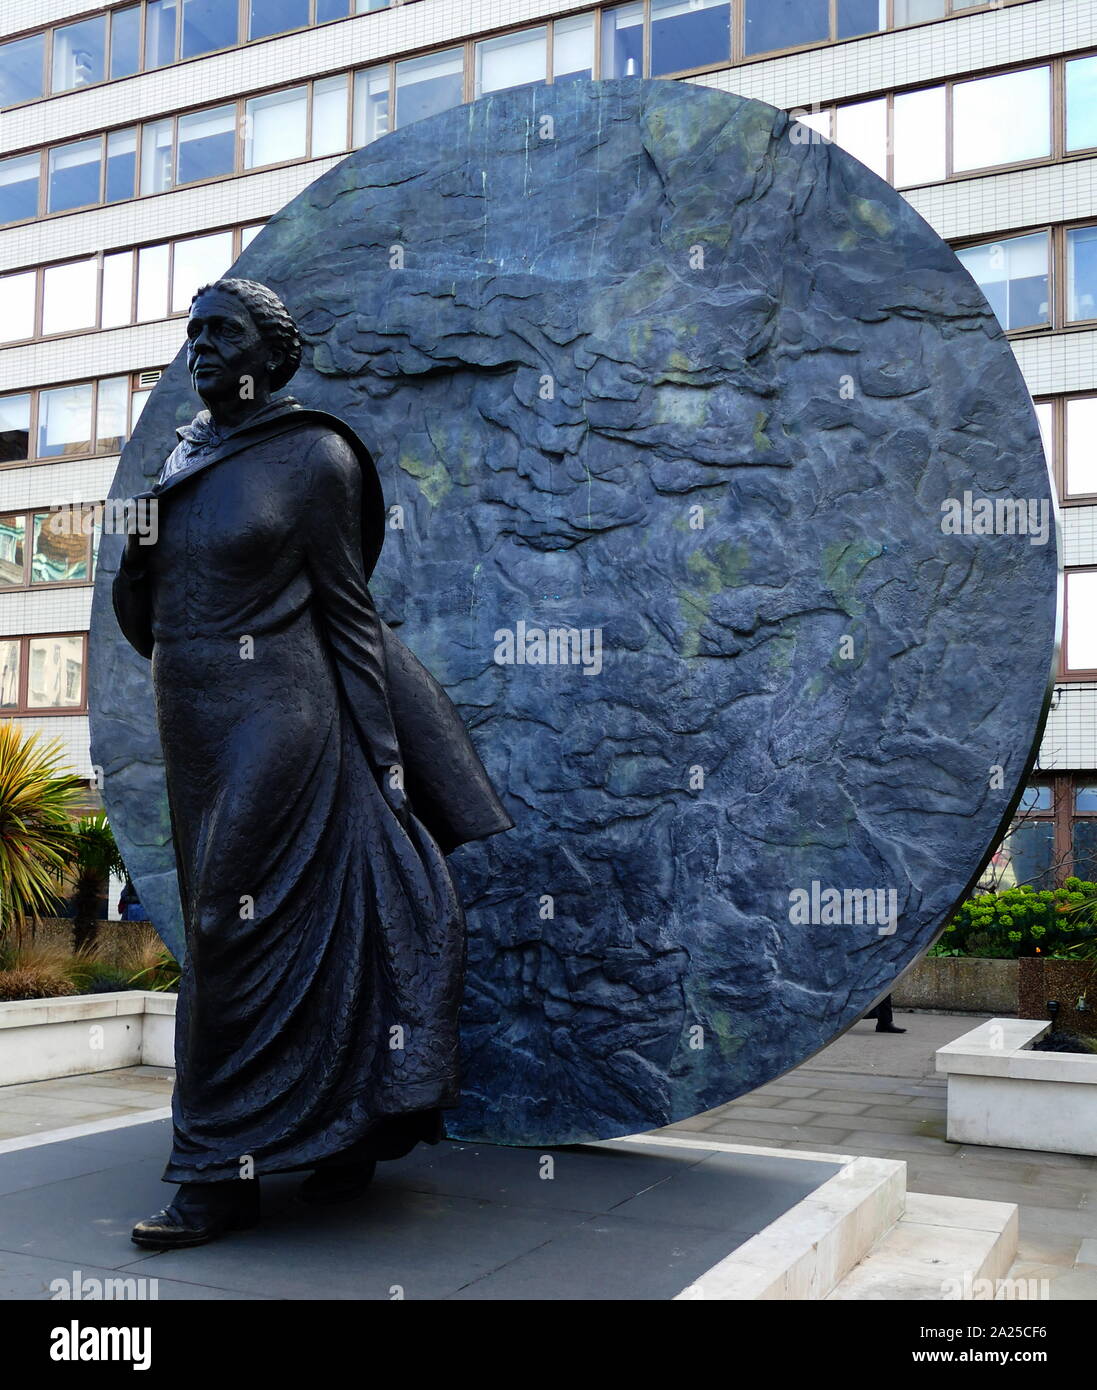 Statue of Mary Seacole at St Thomas' Hospital, London, by Martin Jennings. Mary Jane Seacole OM (1805 – 1881); British-Jamaican business woman and nurse who set up the 'British Hotel' behind the lines during the Crimean War. Stock Photo